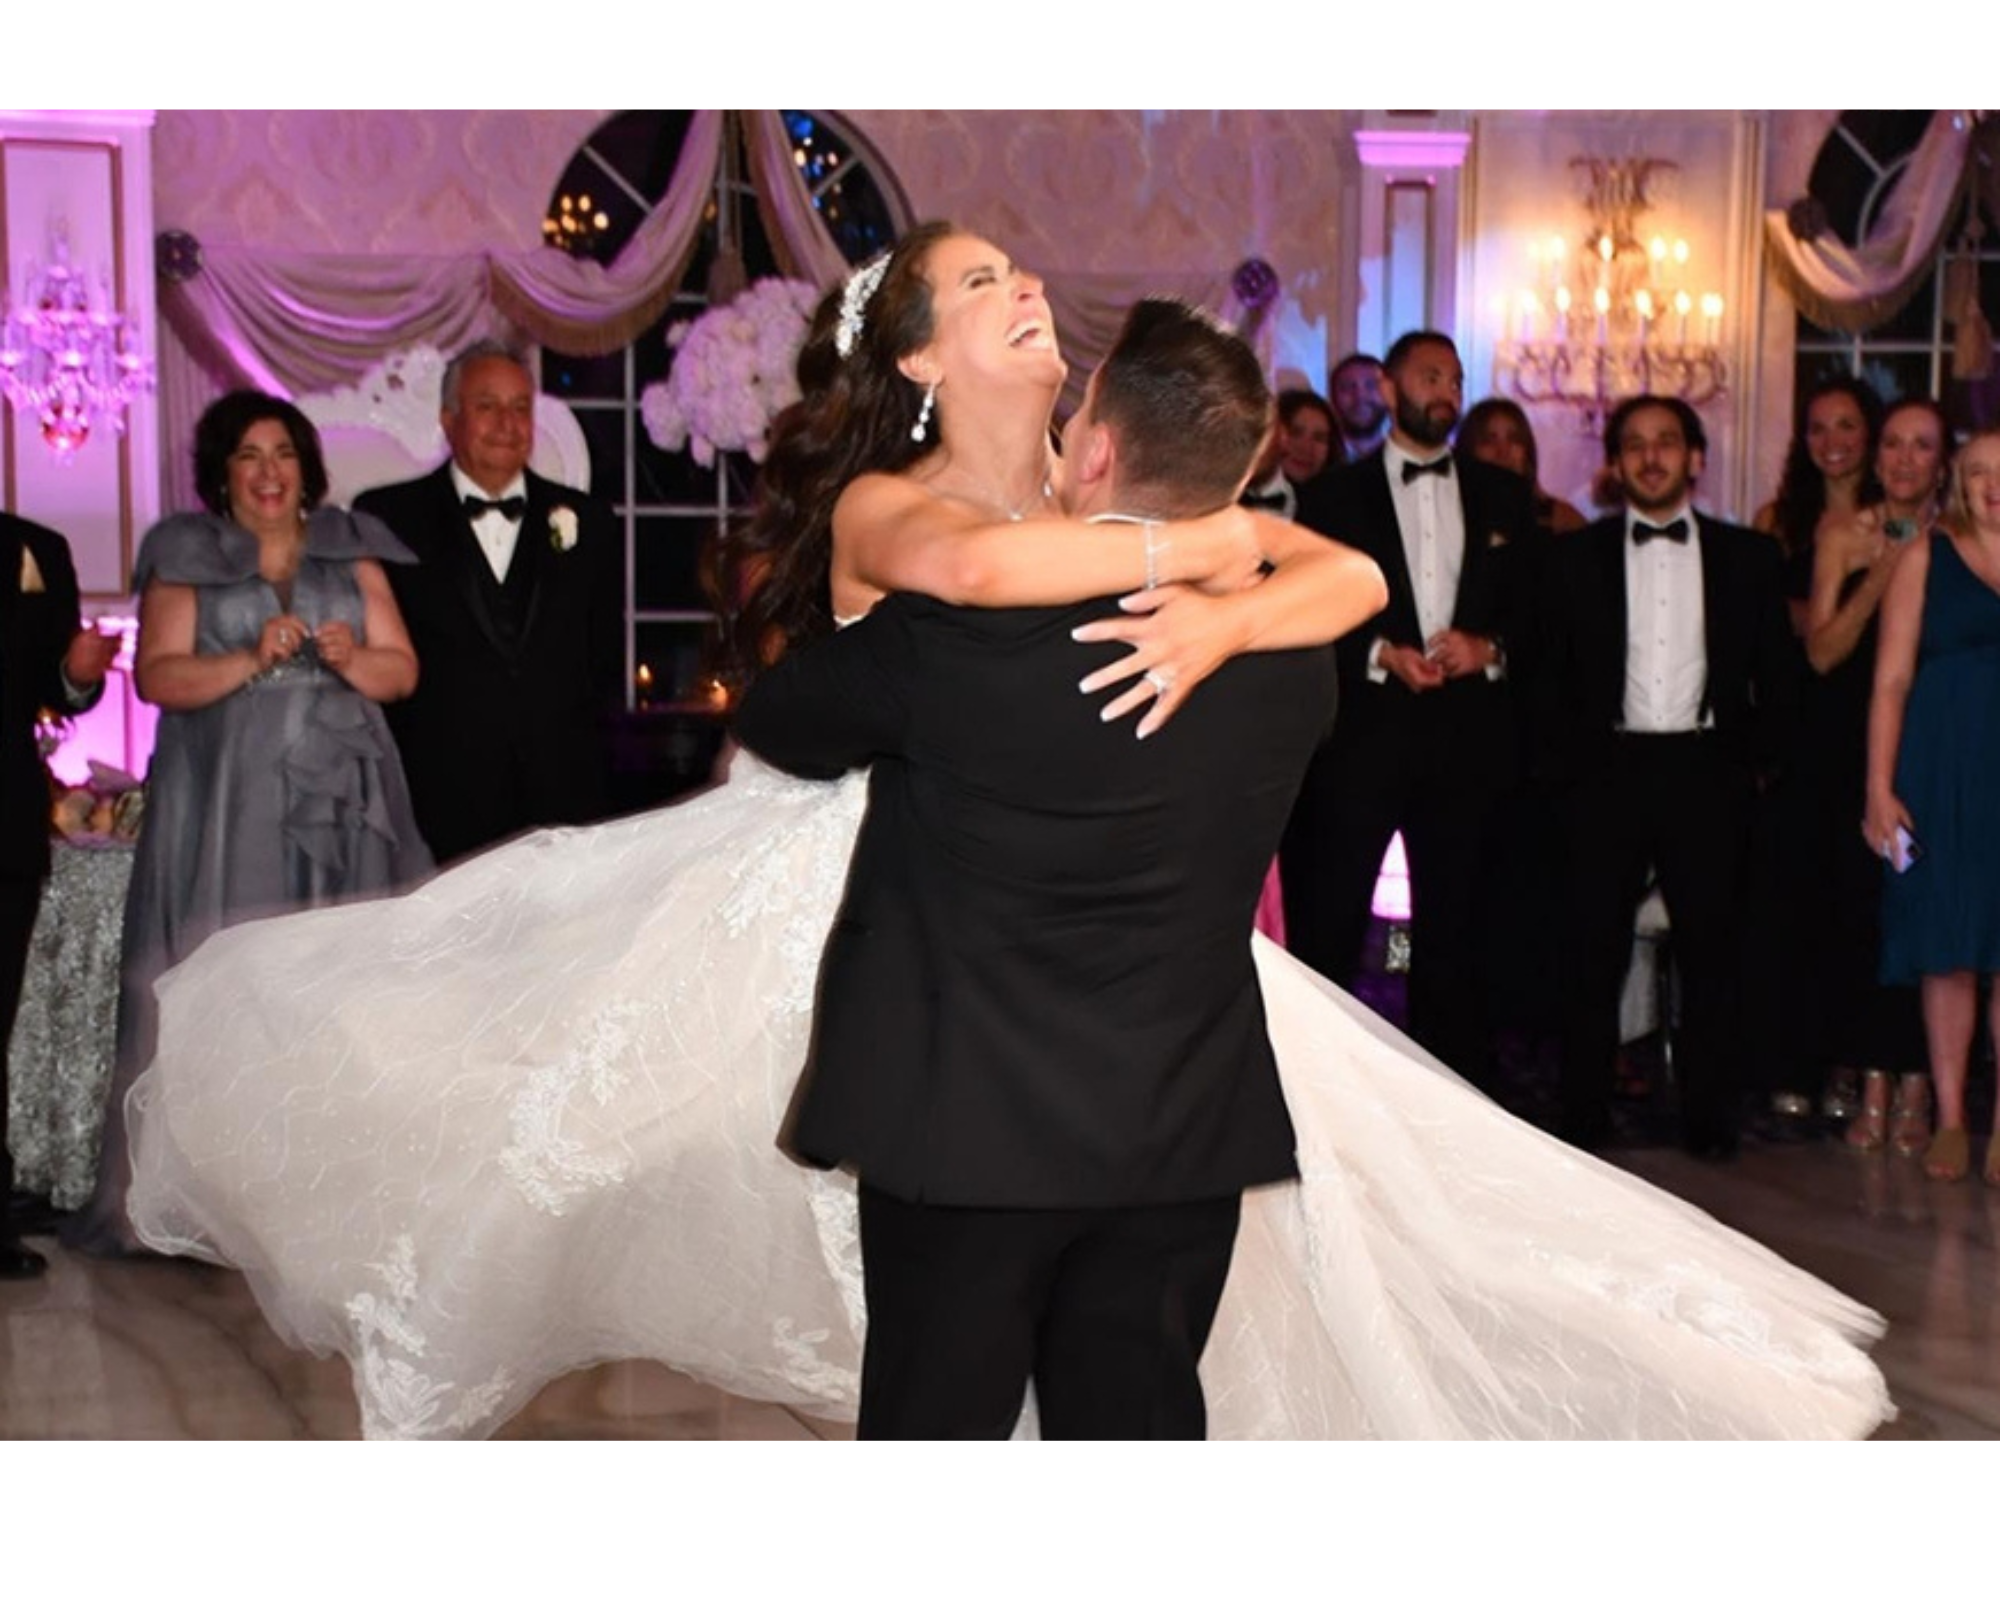 A bride and groom on the dancefloor. He is twirling her in his arms, and she is laughing and joyful.